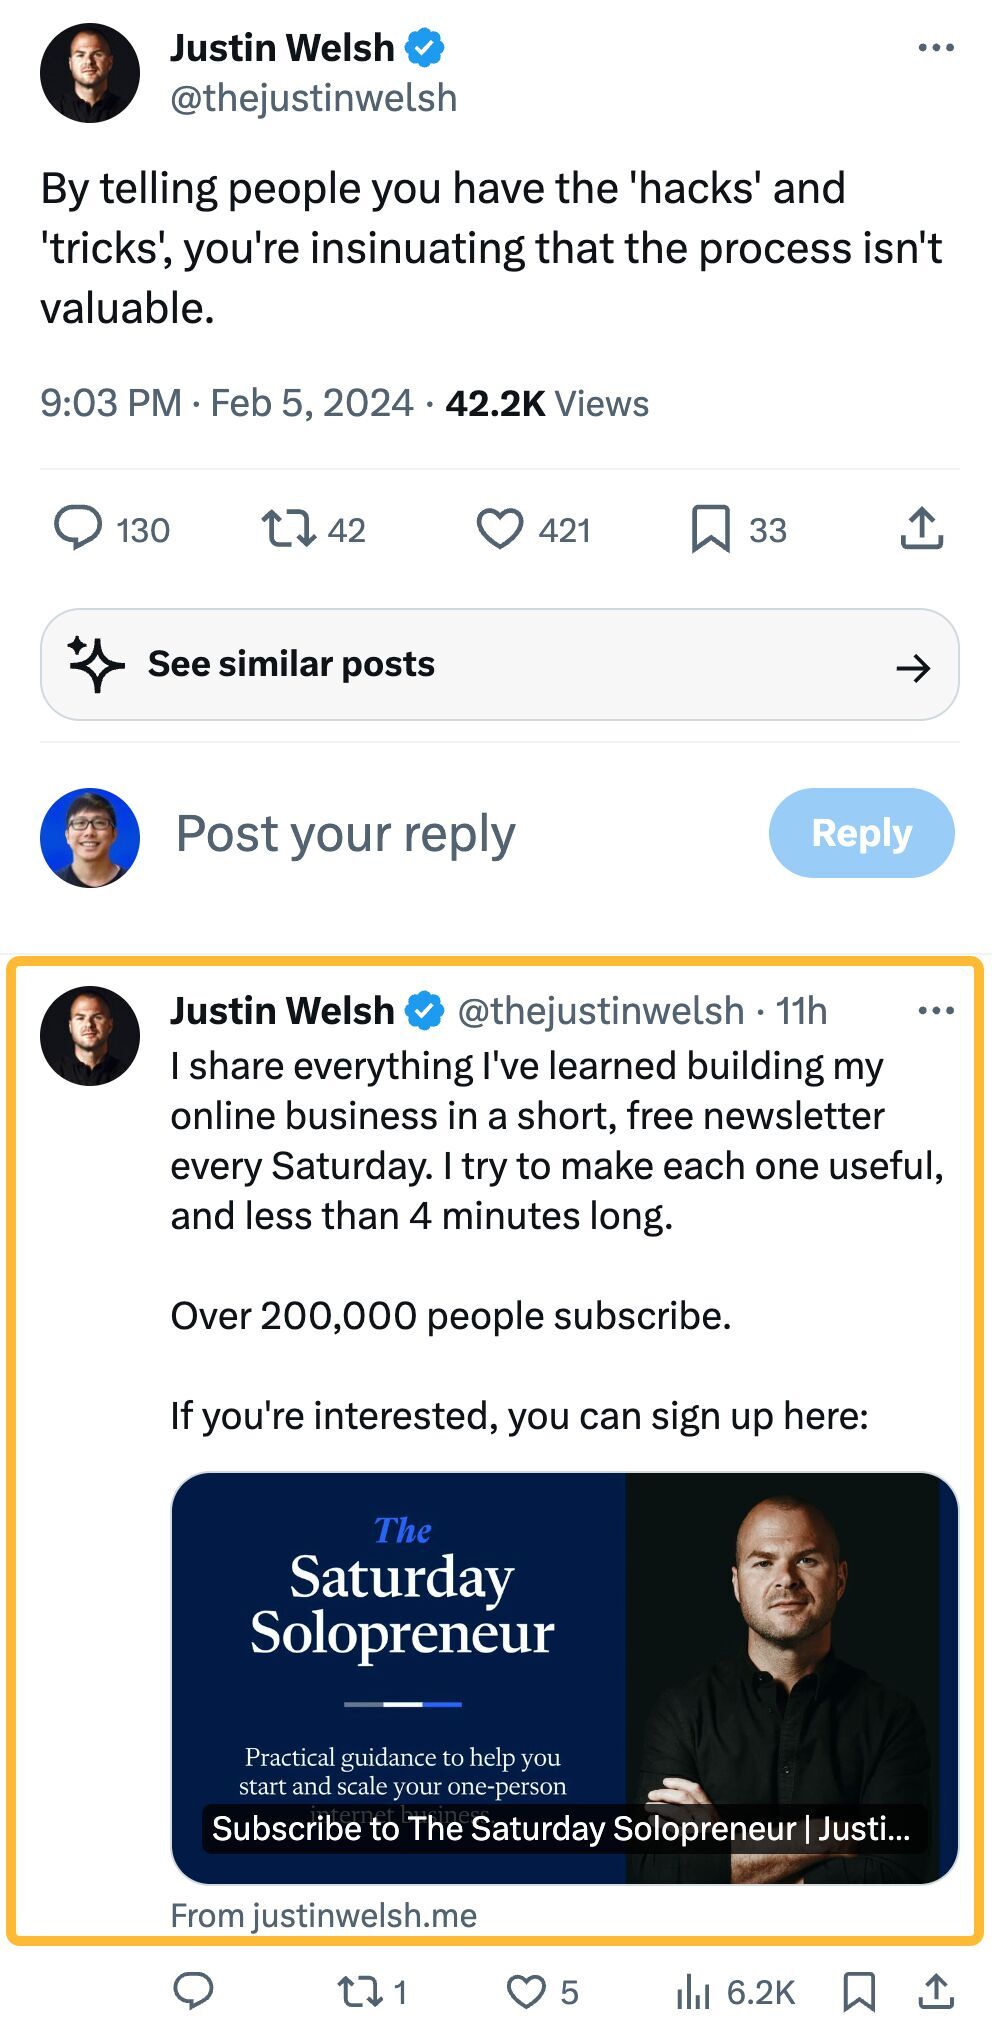 Justin Welsh asks his followers to subscribe to his email list